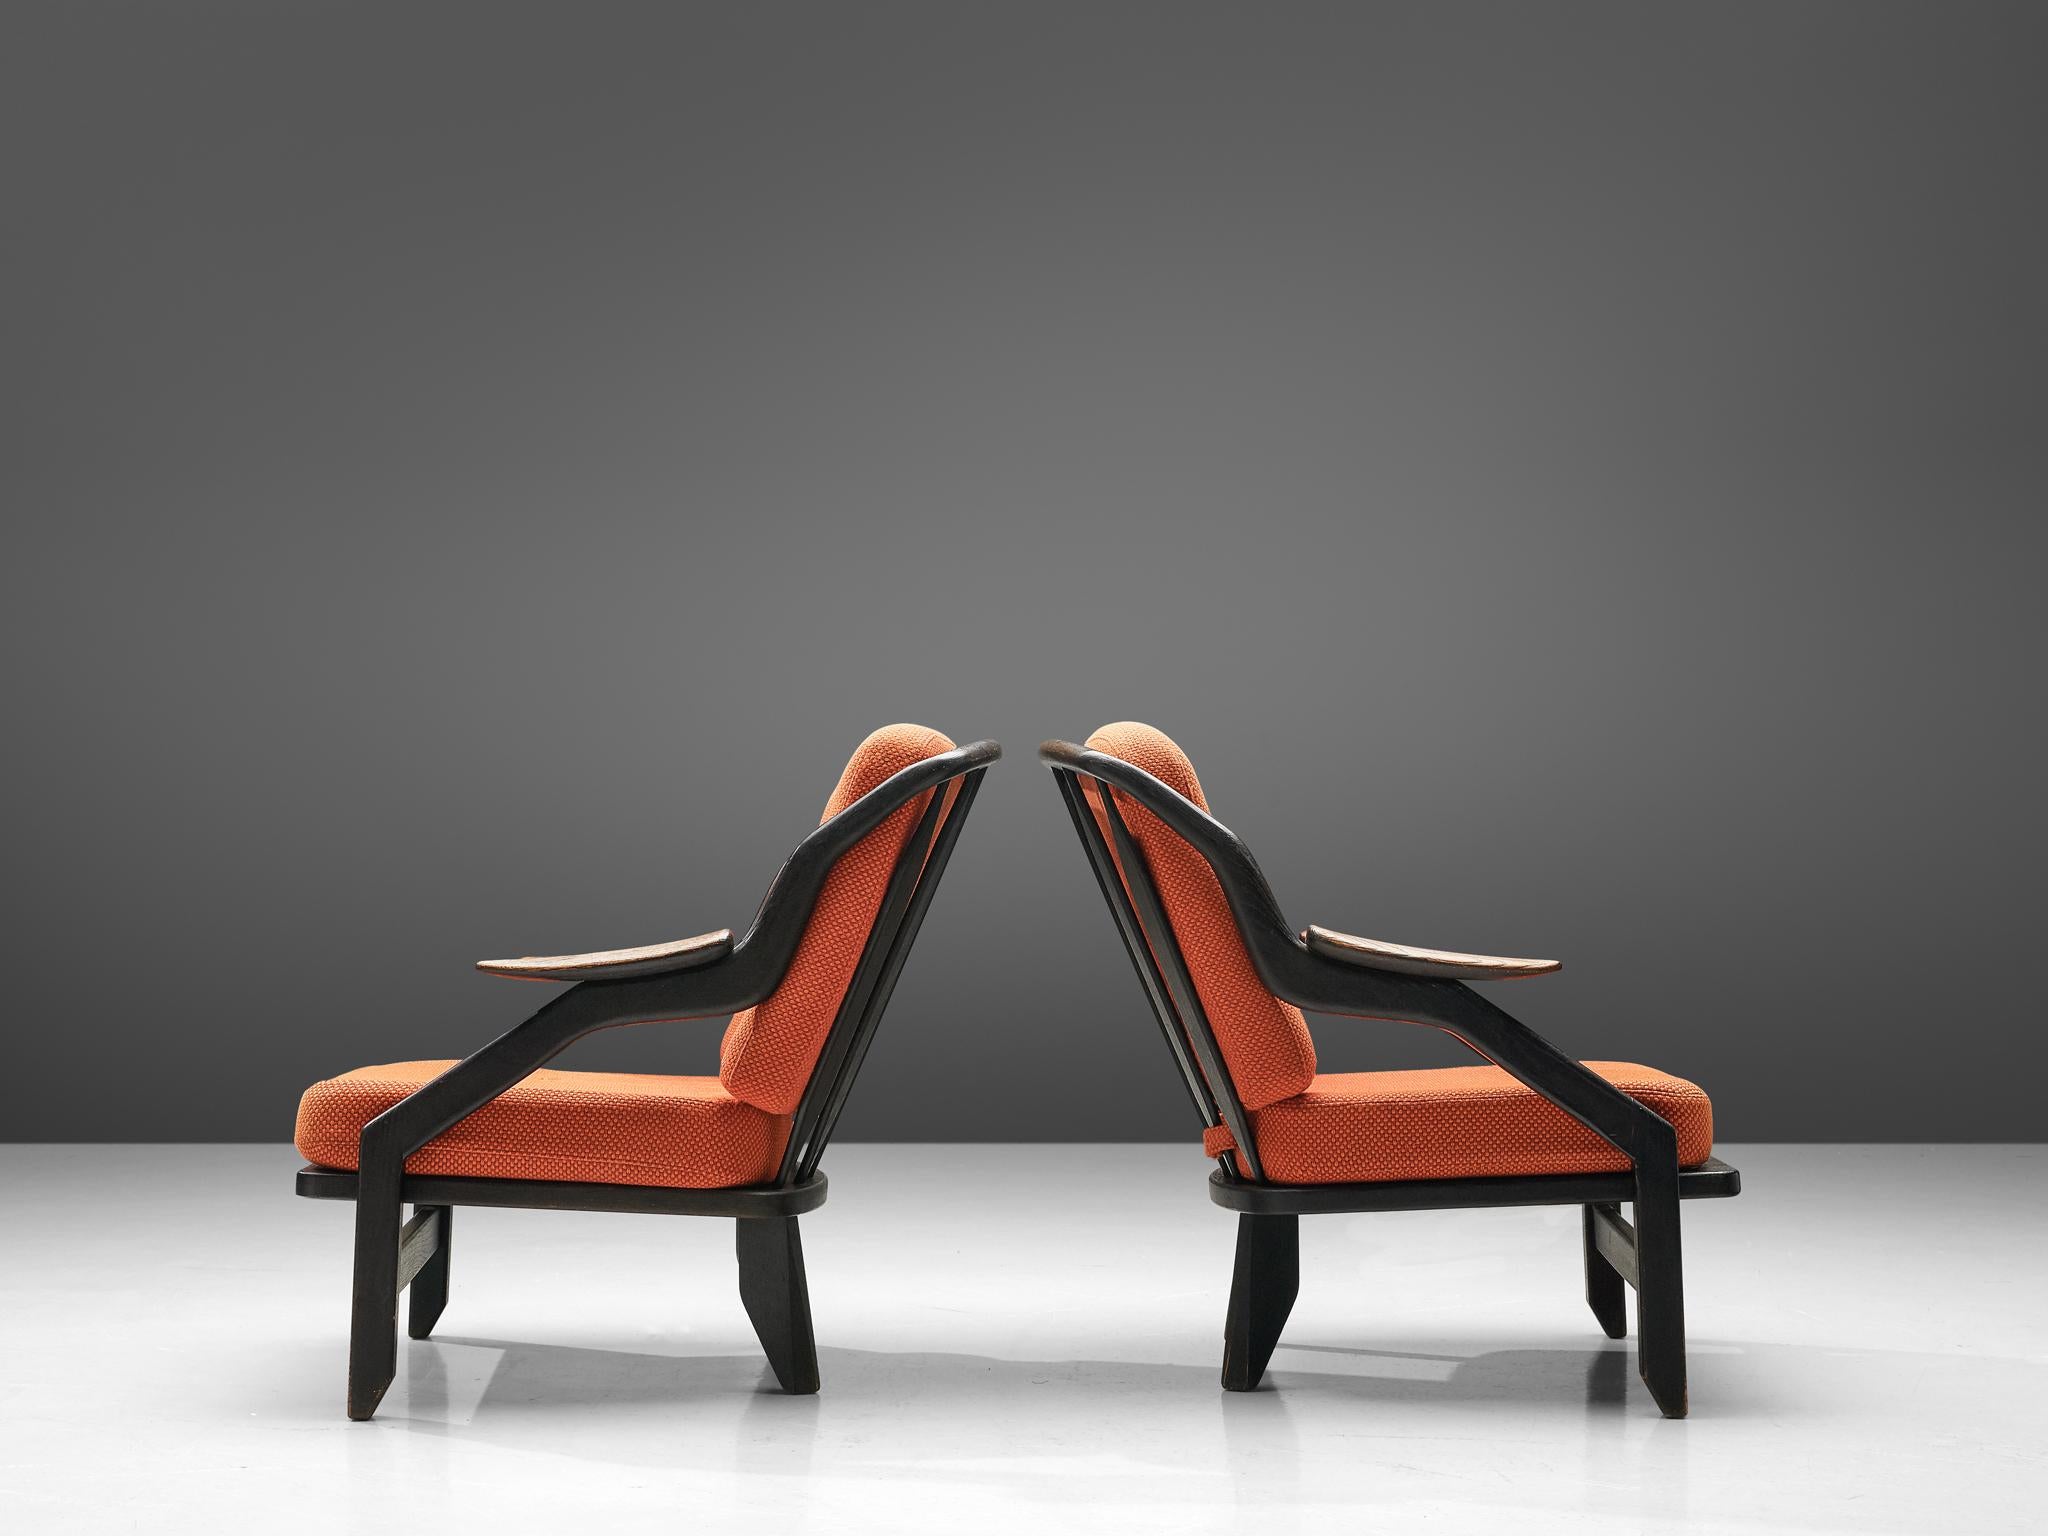 Fabric Pair of Lounge Chairs with Orange Upholstery by Guillerme & Chambron